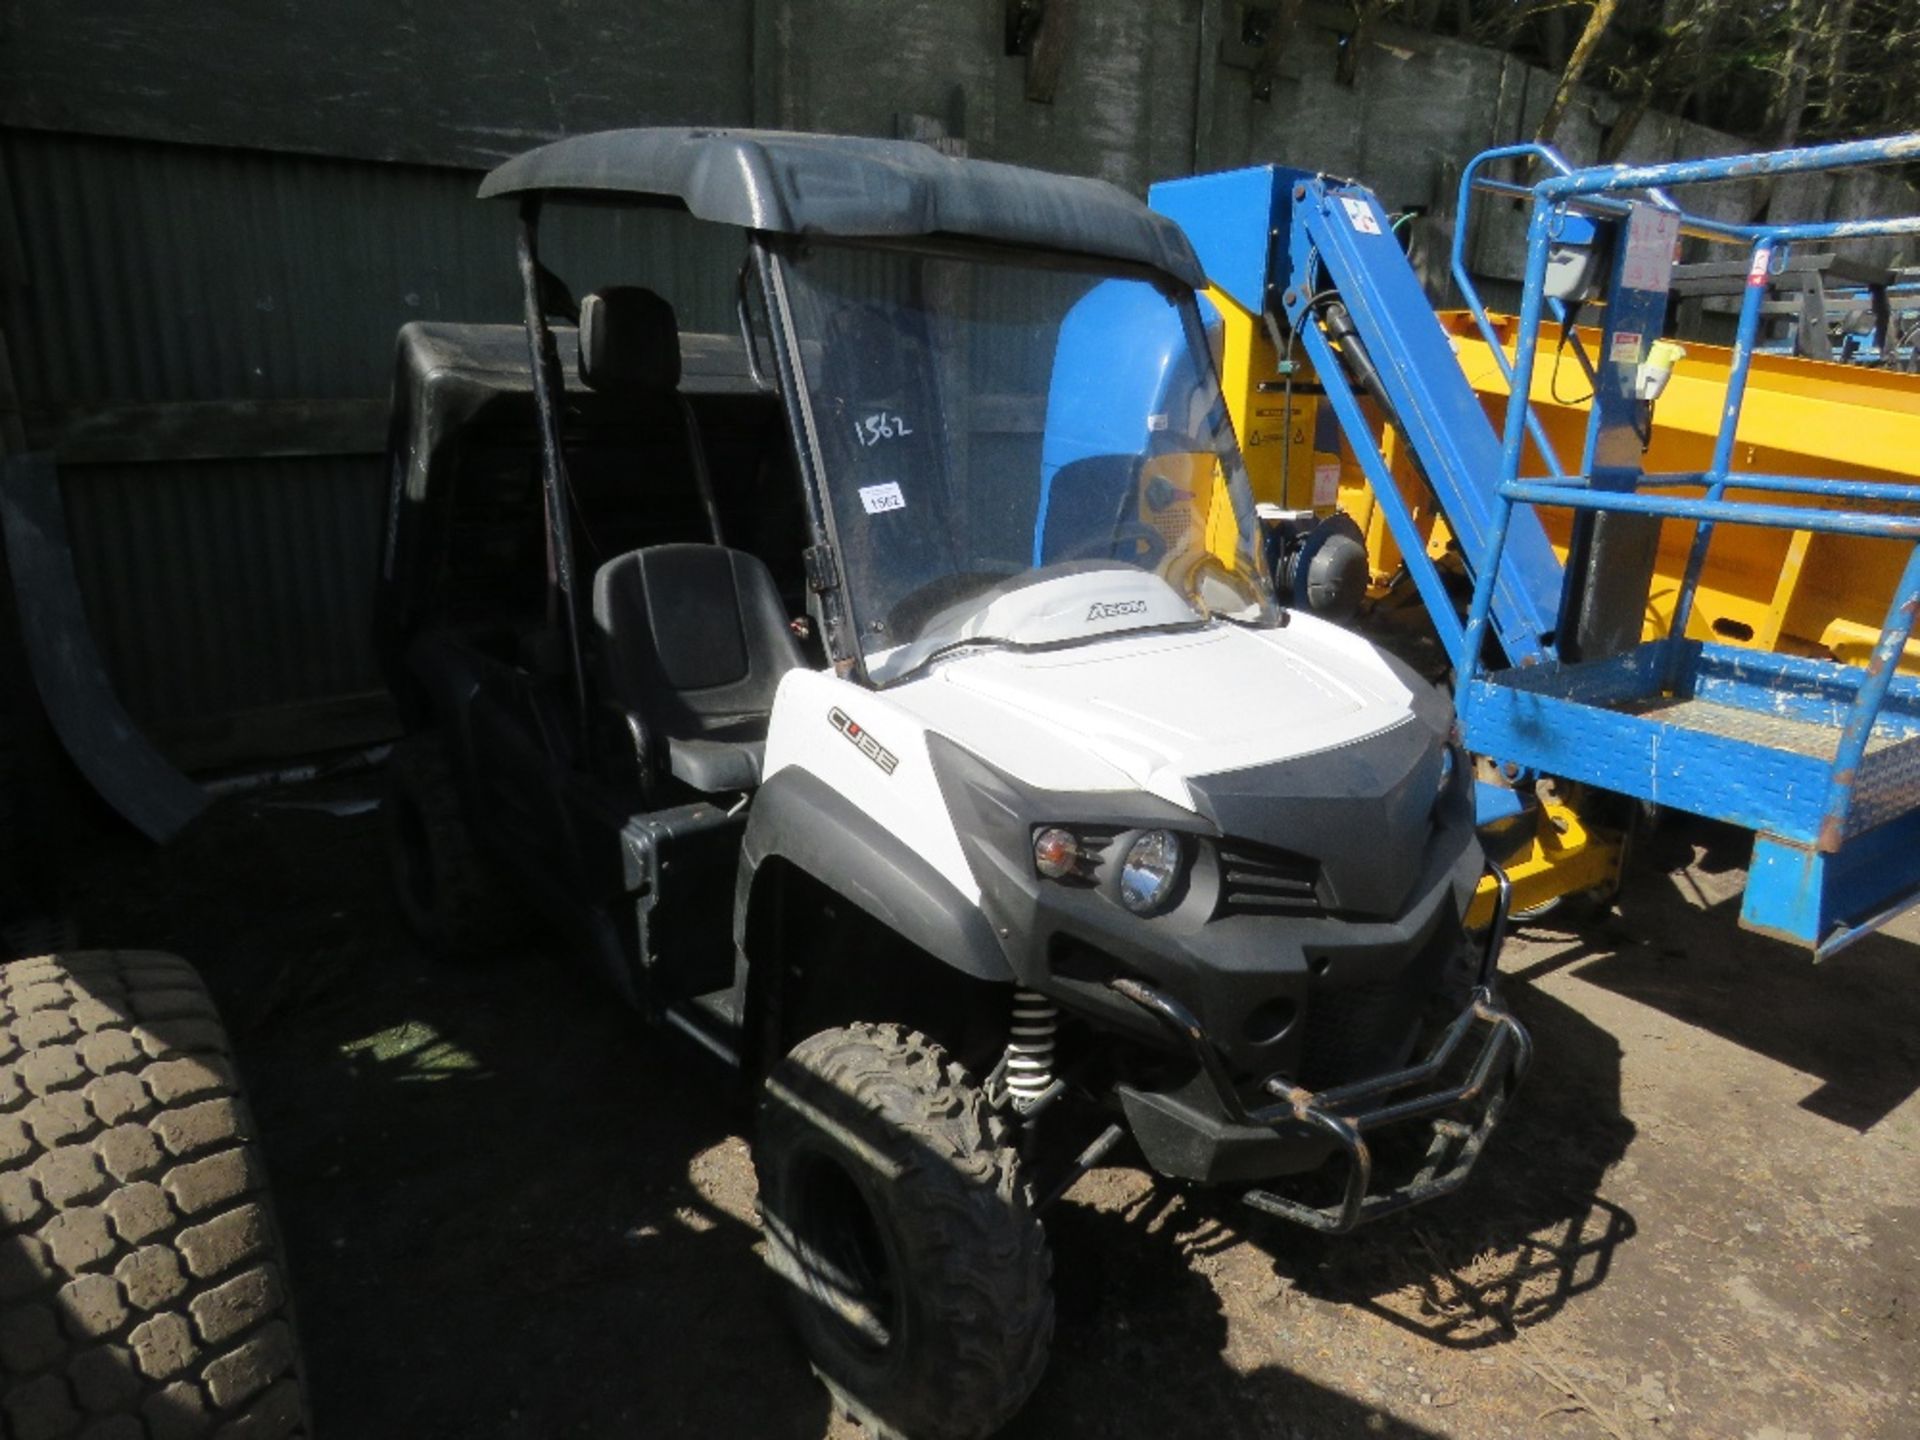 AEON CUBE PETROL ENGINED UTILITY VEHICLE WITH REAR BUCK. ON THE SAME SMALLHOLDING FROM NEW. WHEN TES